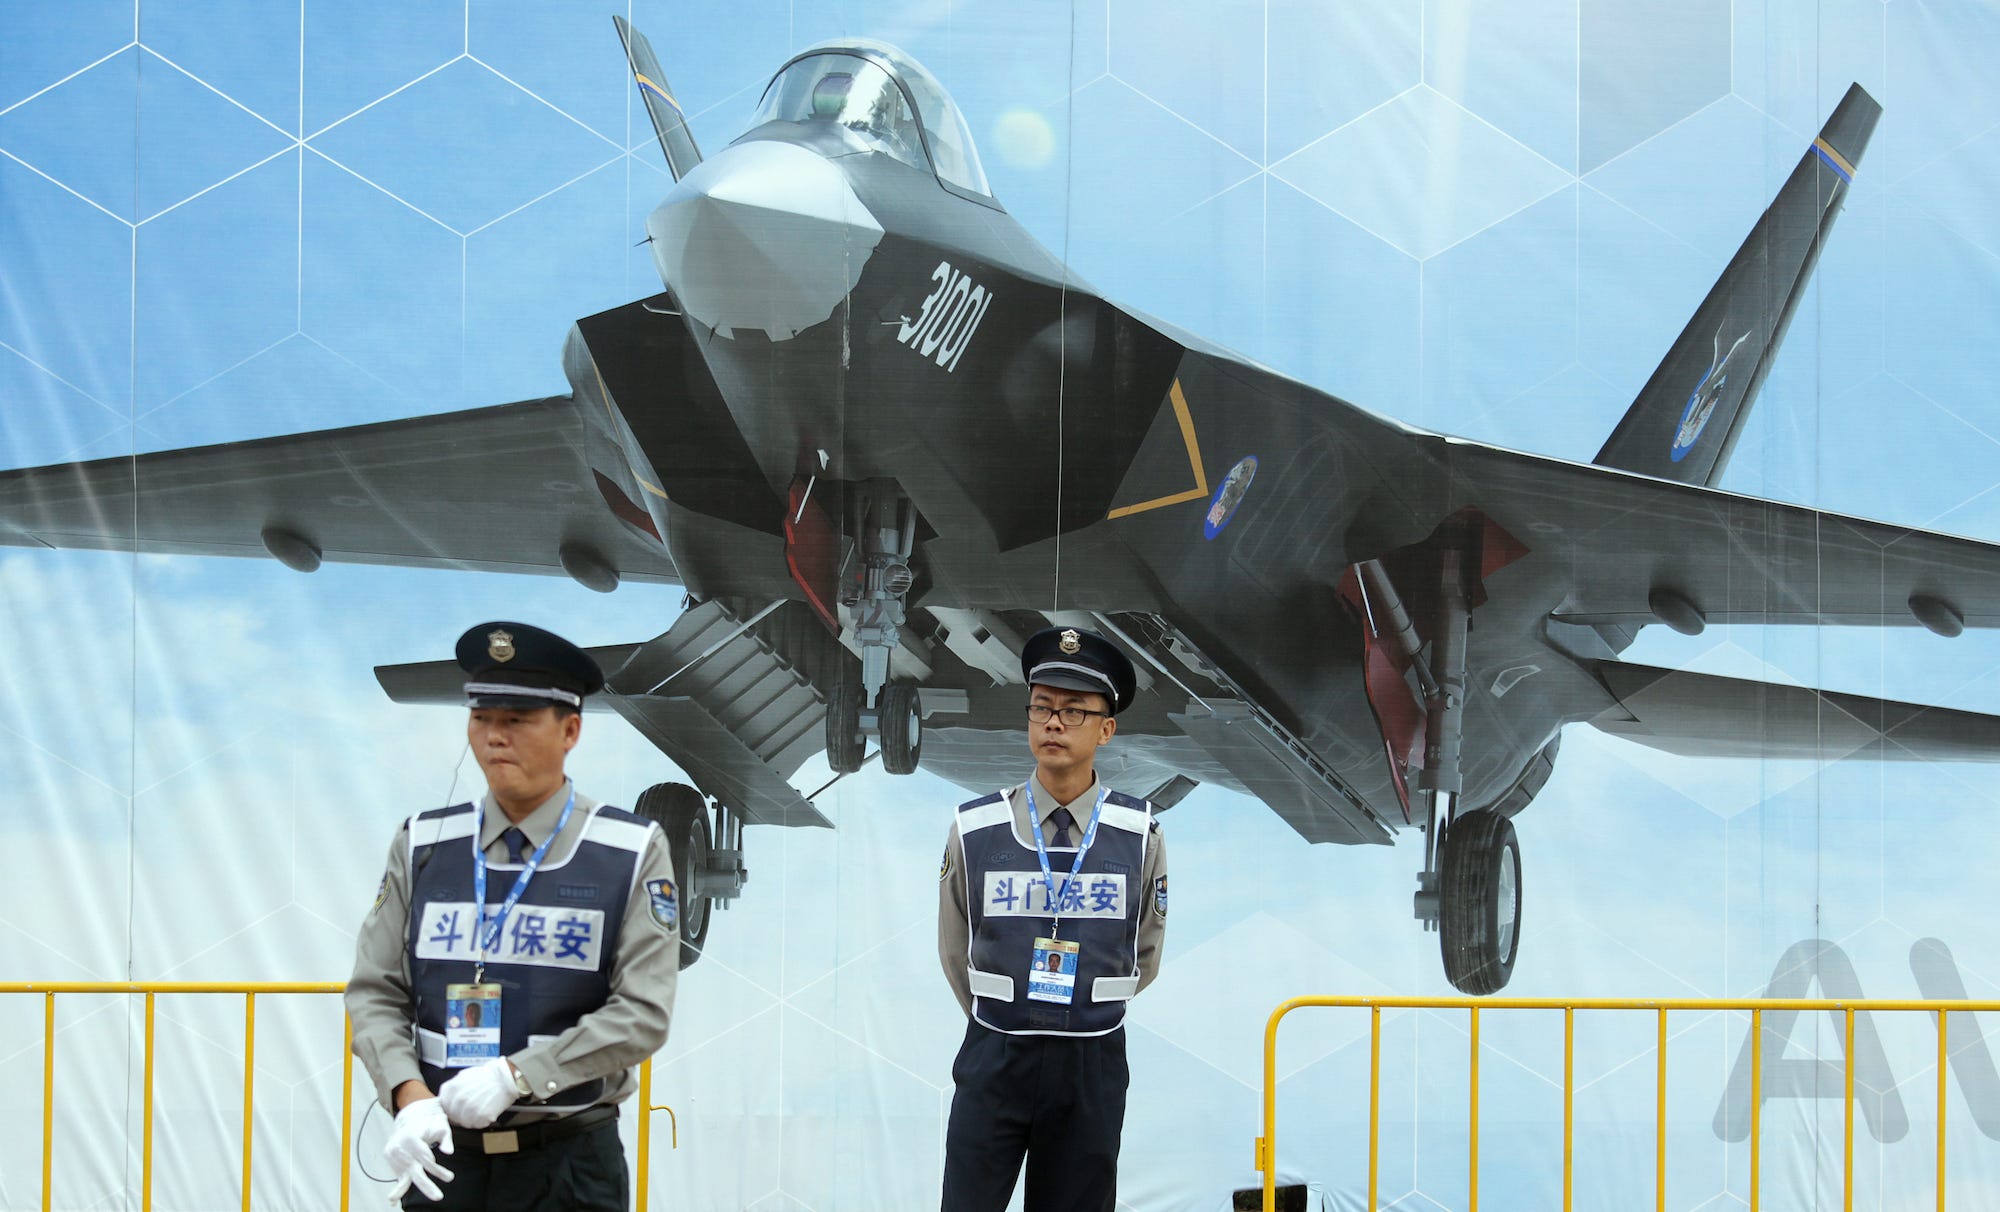 Security guards in front of poster of FC-31 J-31 J-35 fighter jet